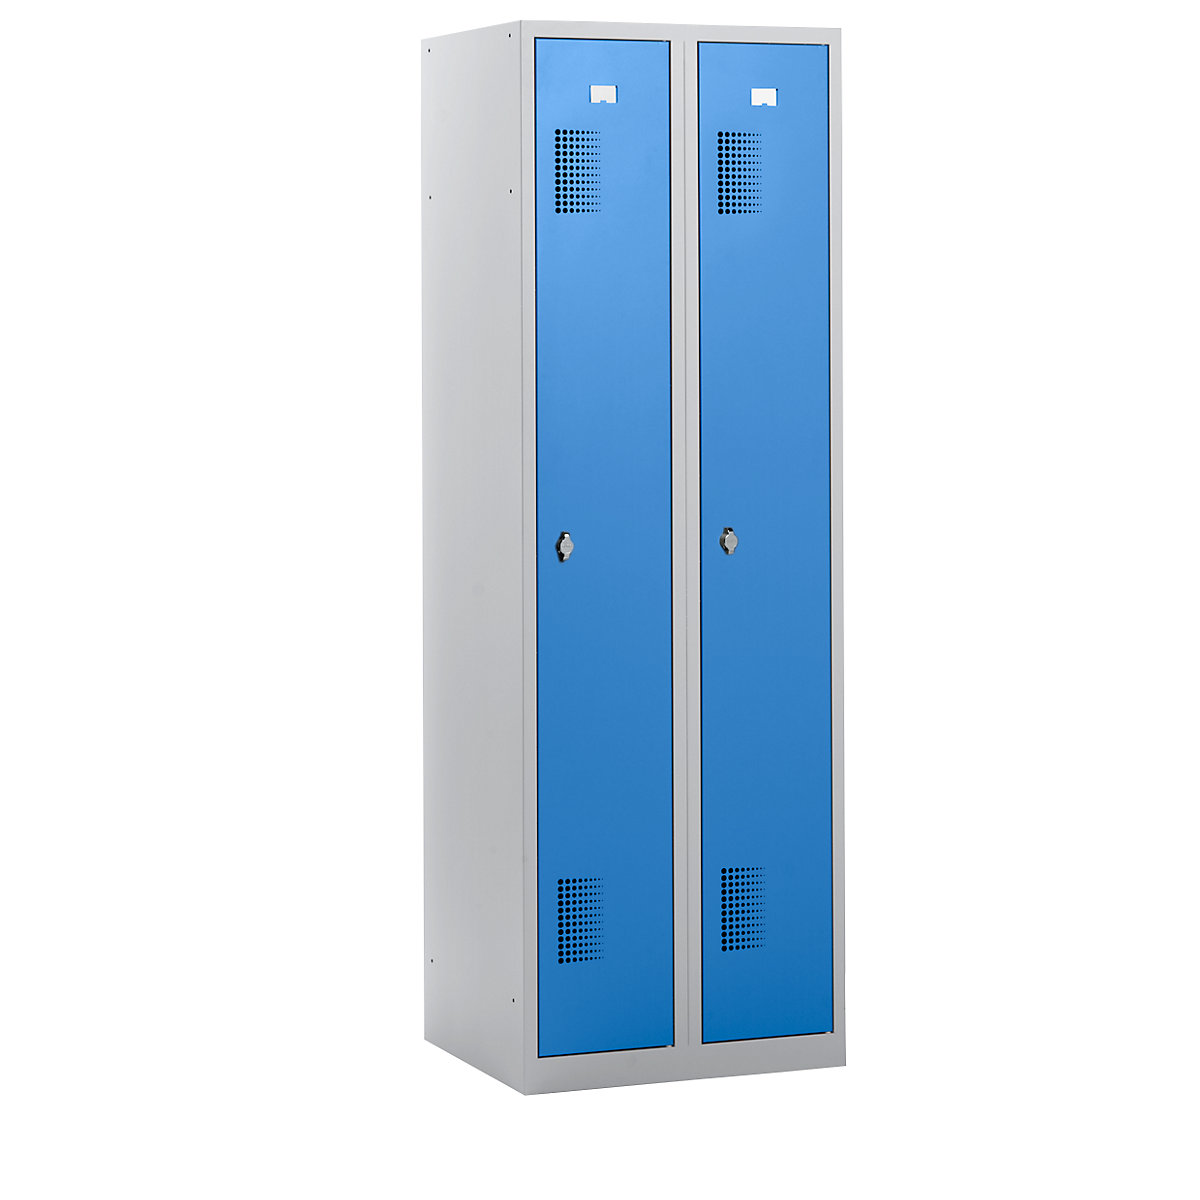 AMSTERDAM cloakroom locker – eurokraft basic, height 1800 mm, width 600 mm, 2 x 298 mm wide compartments, with fittings for padlock, light grey body / light blue doors-25